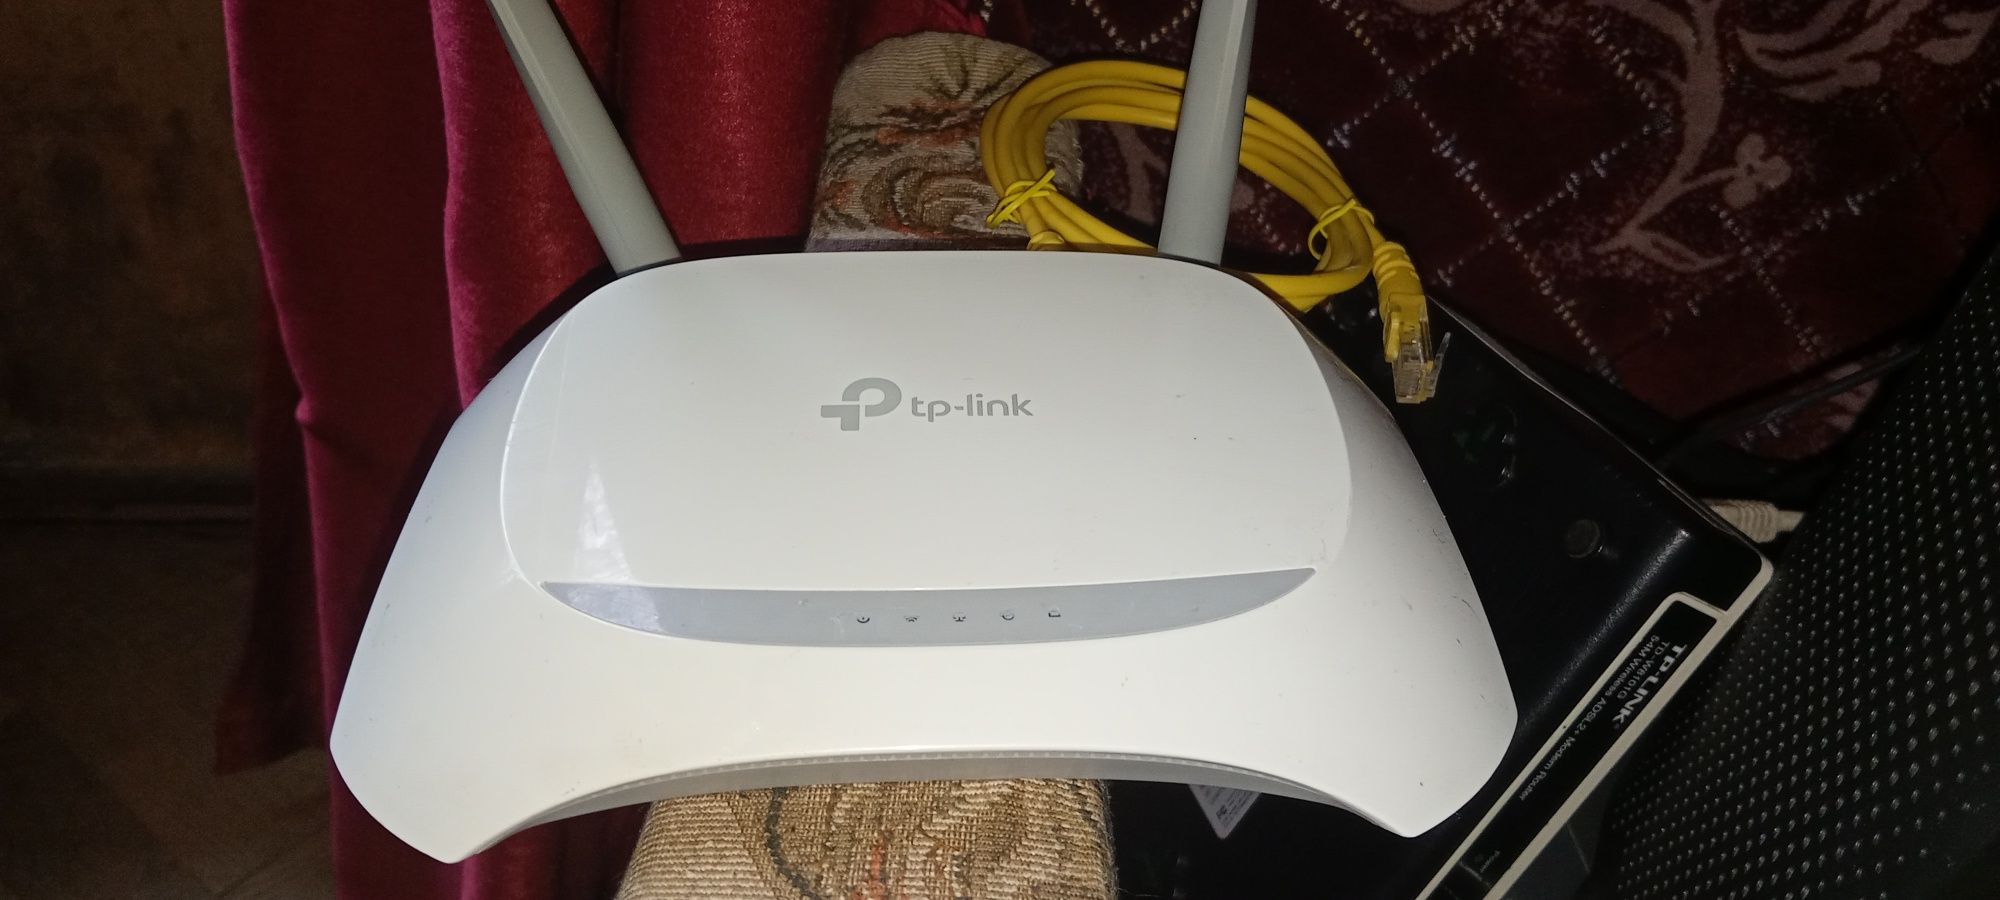 Wi-fi router TP-Link wn840n